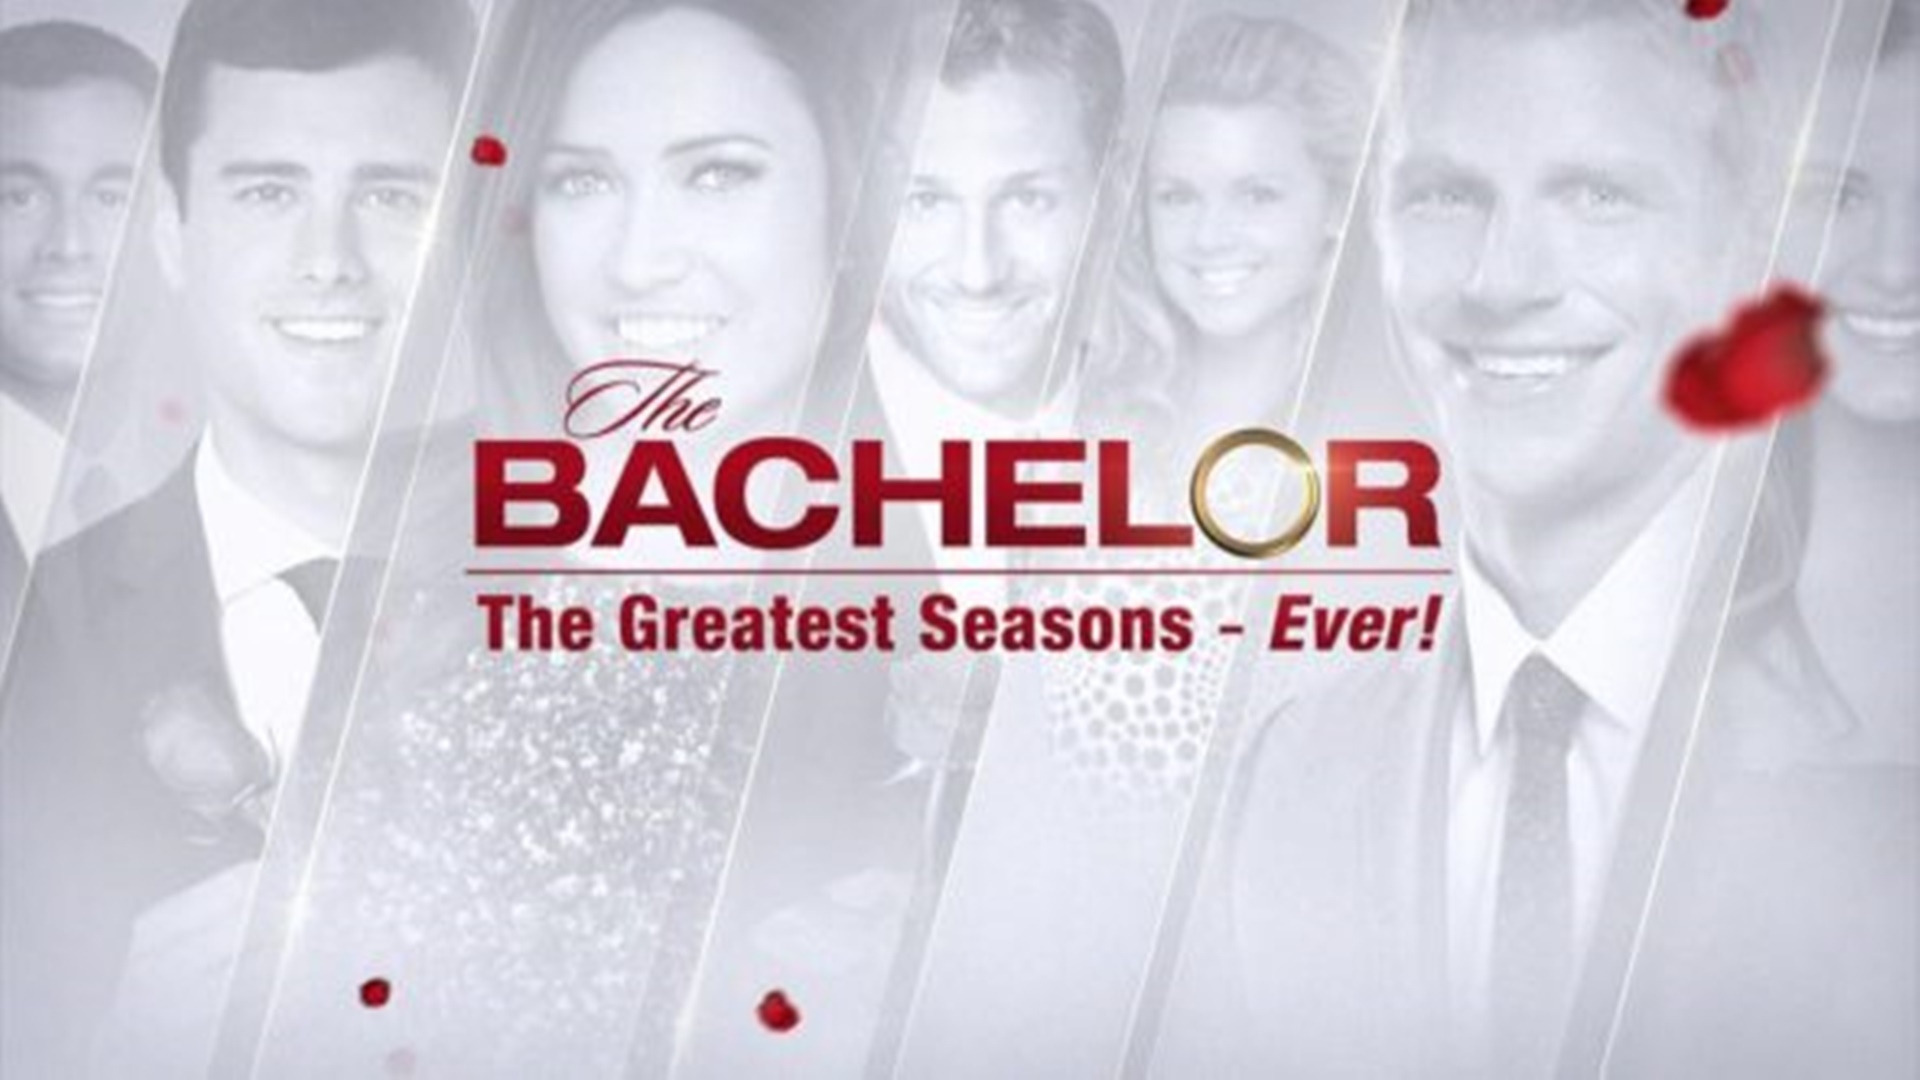 Show The Bachelor: The Greatest Seasons – Ever!